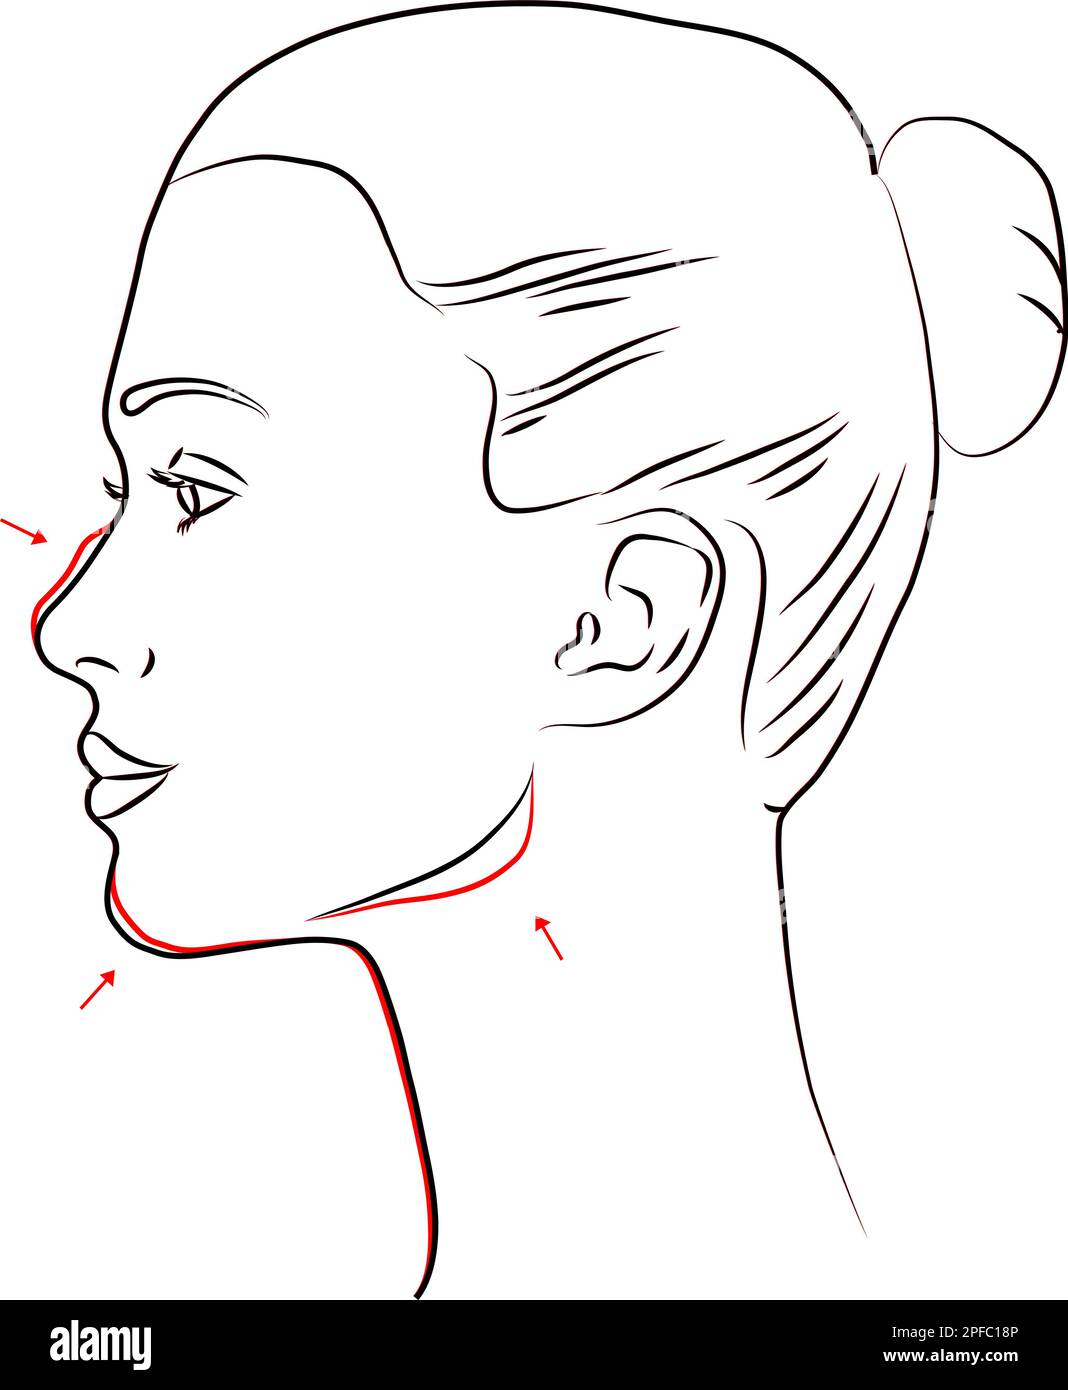 aesthetic medicine before and after of a woman's profile. Line drawing vector illustration Stock Vector